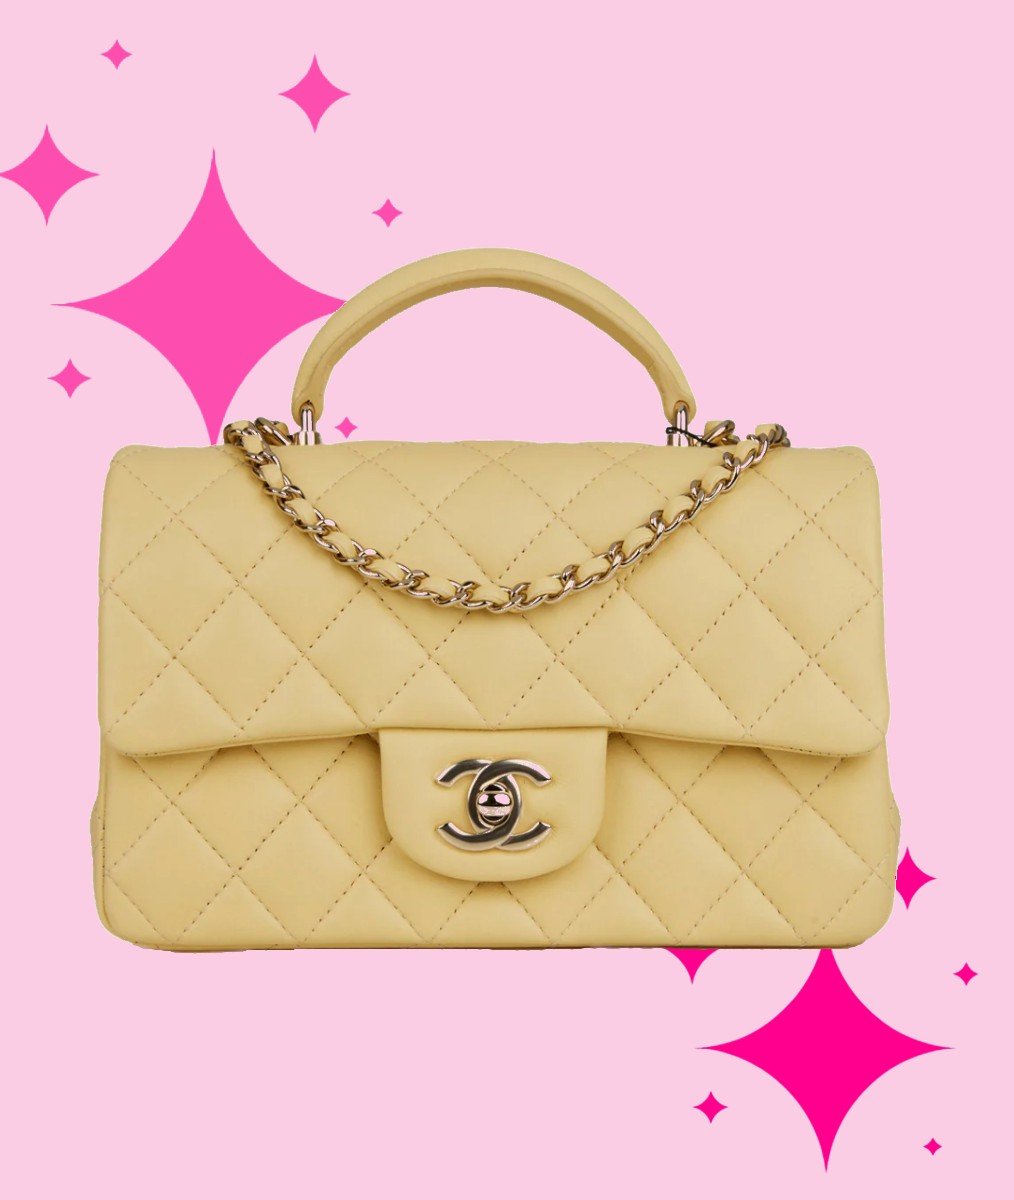 The Chanel Flap Bag: Iconic Since 1955 | Handbags & Accessories | Sotheby's